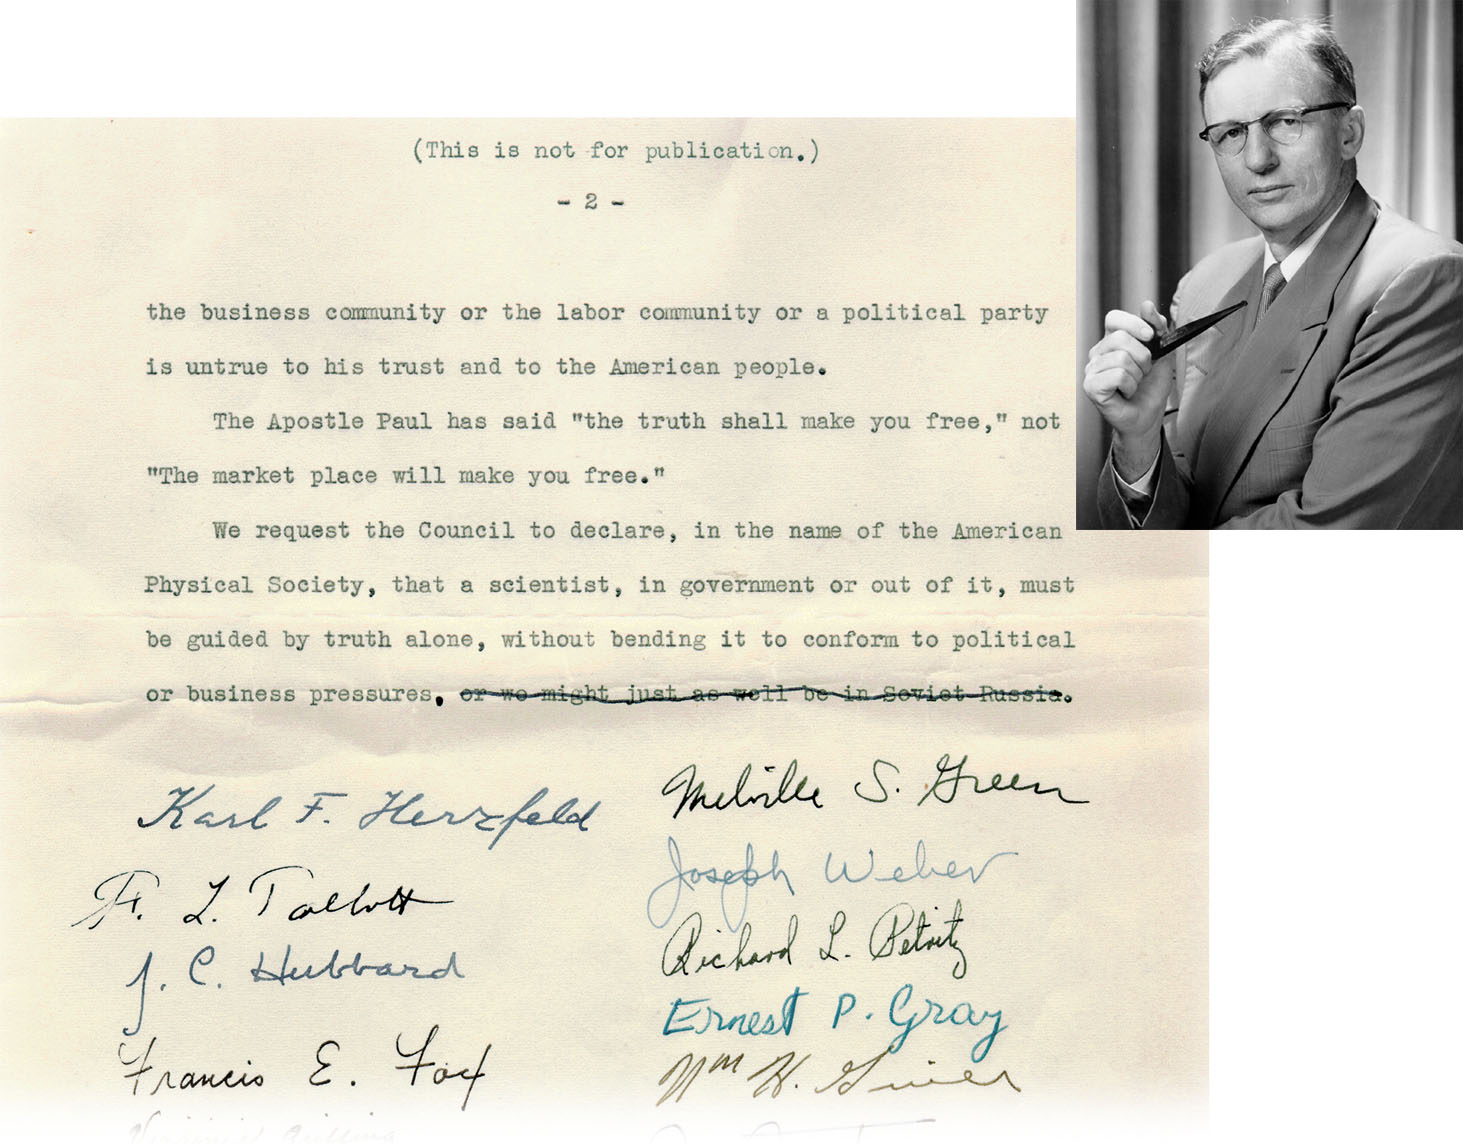 Petition submitted by Washington D.C. area APS members in April 1953 in support of Astin (detail).